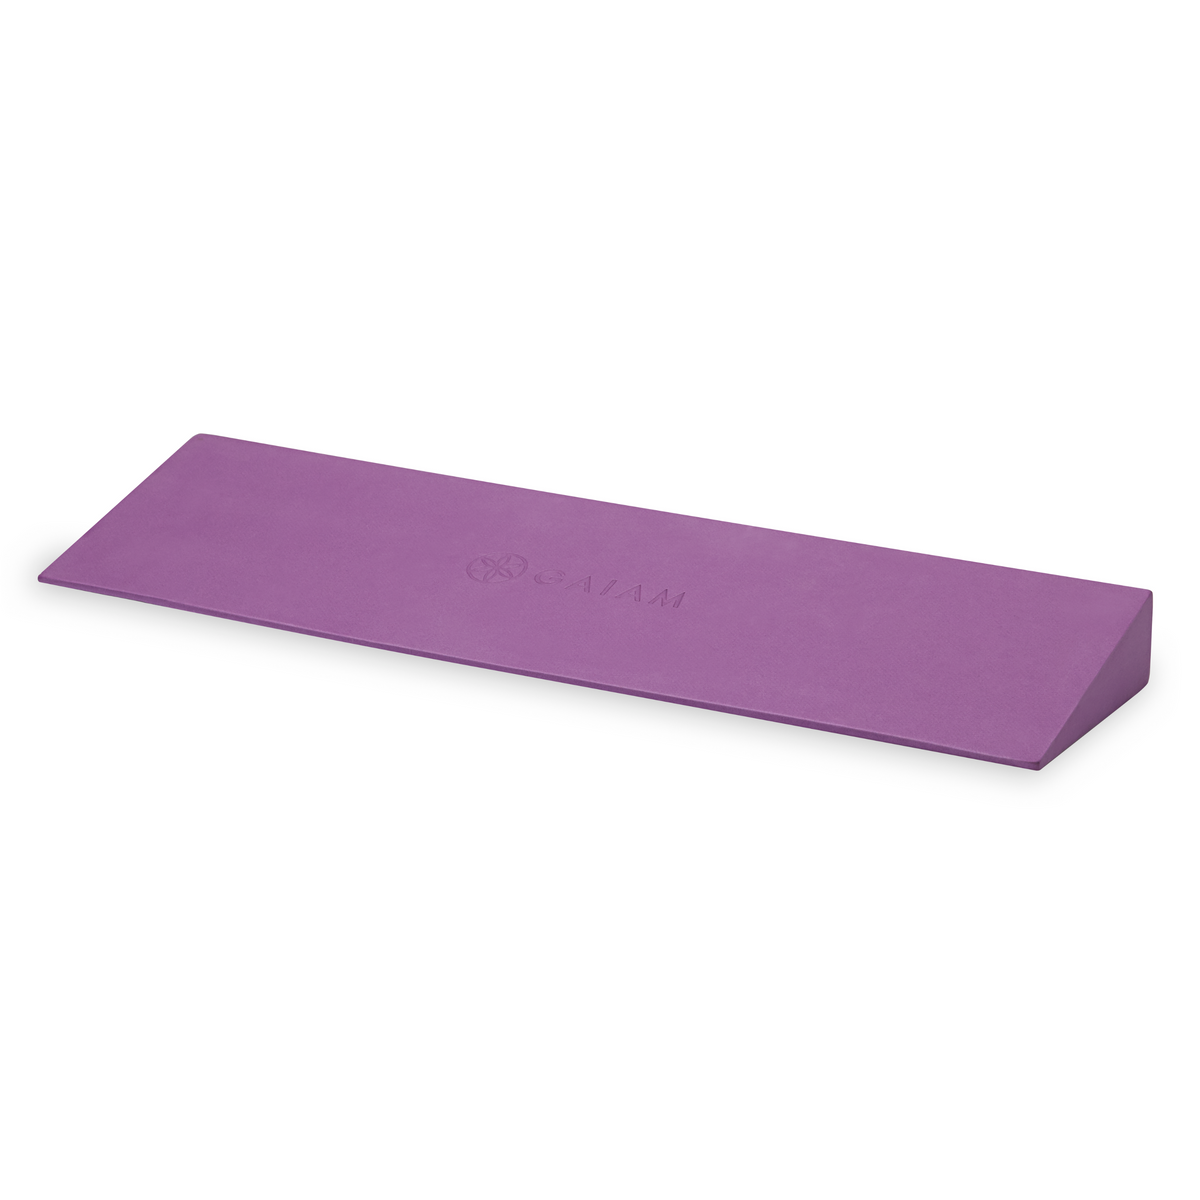 Front of yoga wedge